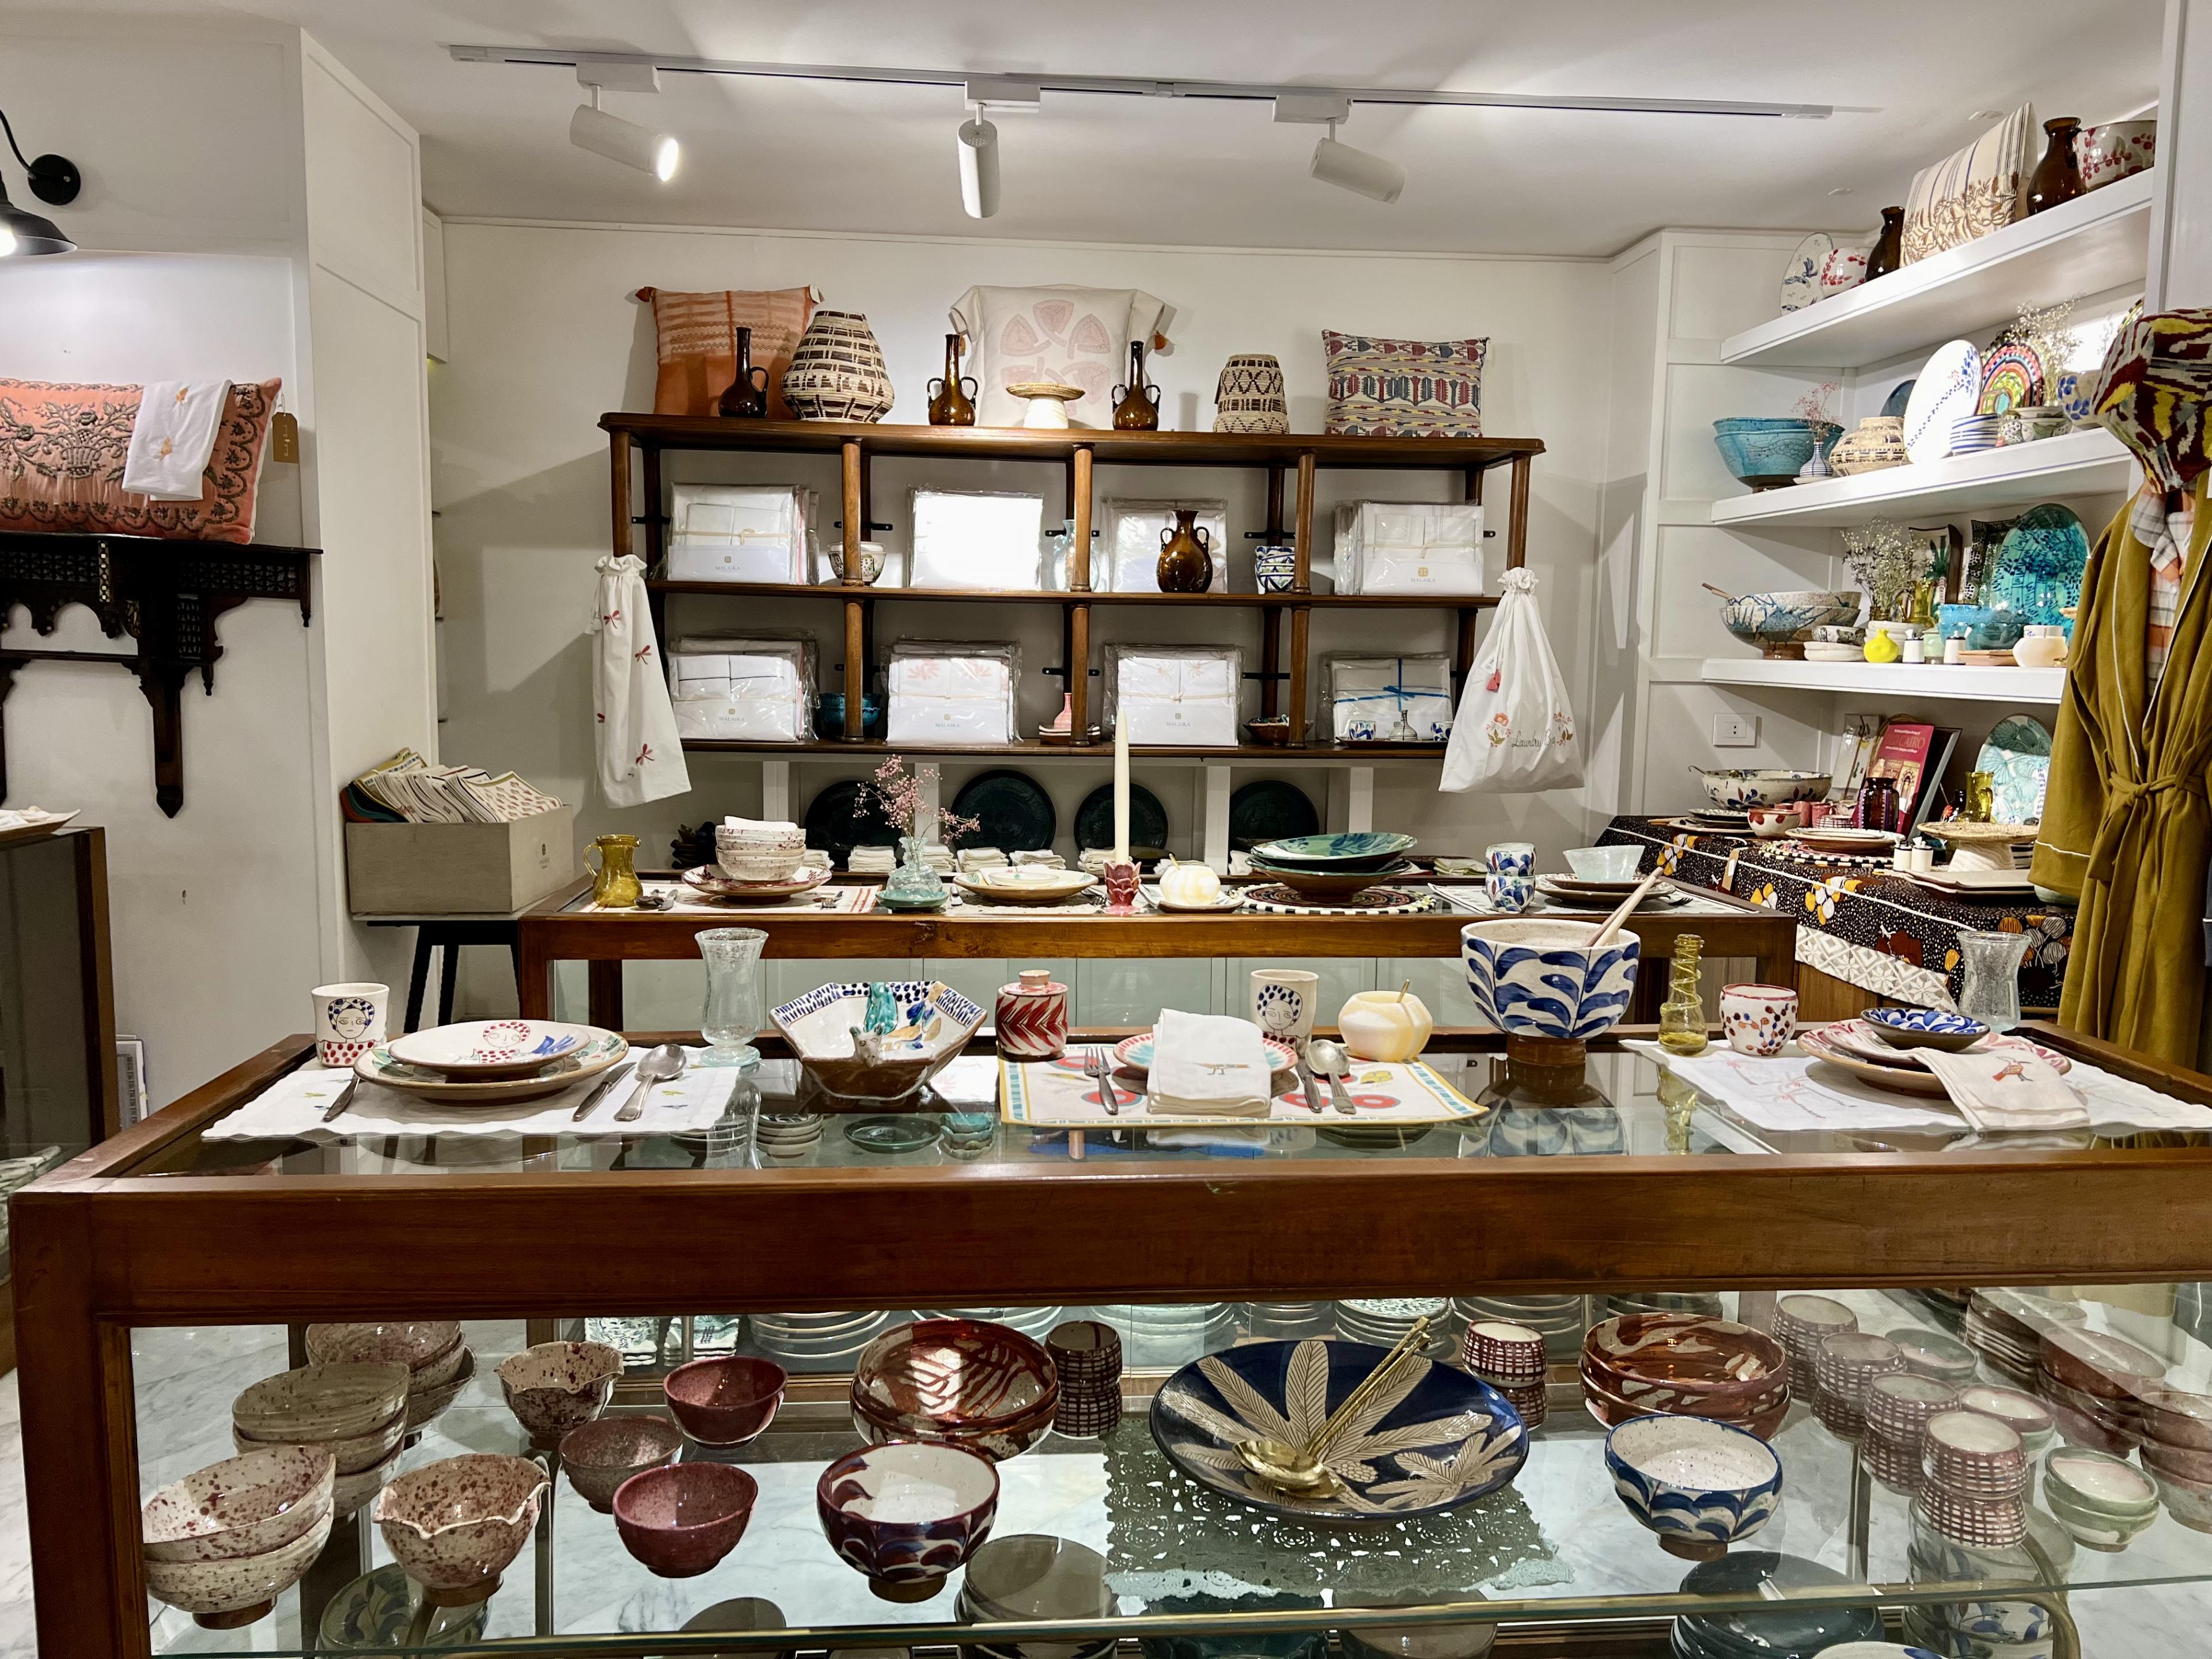 Glass display case full of ceramic bowls and shelving behind stacked with pillows, bowls and vases  